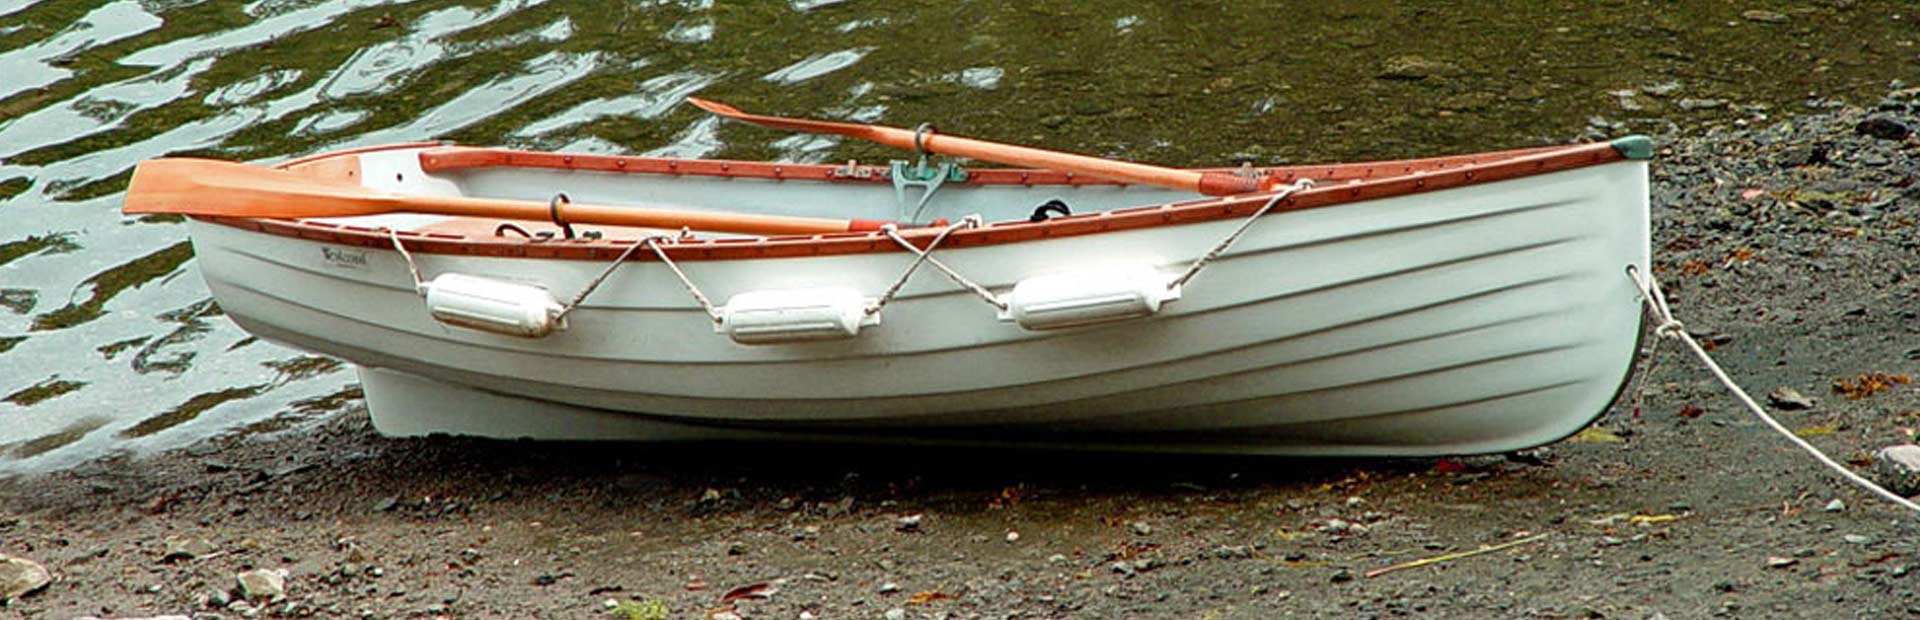 Small rowboat landed on the shore by a lake.